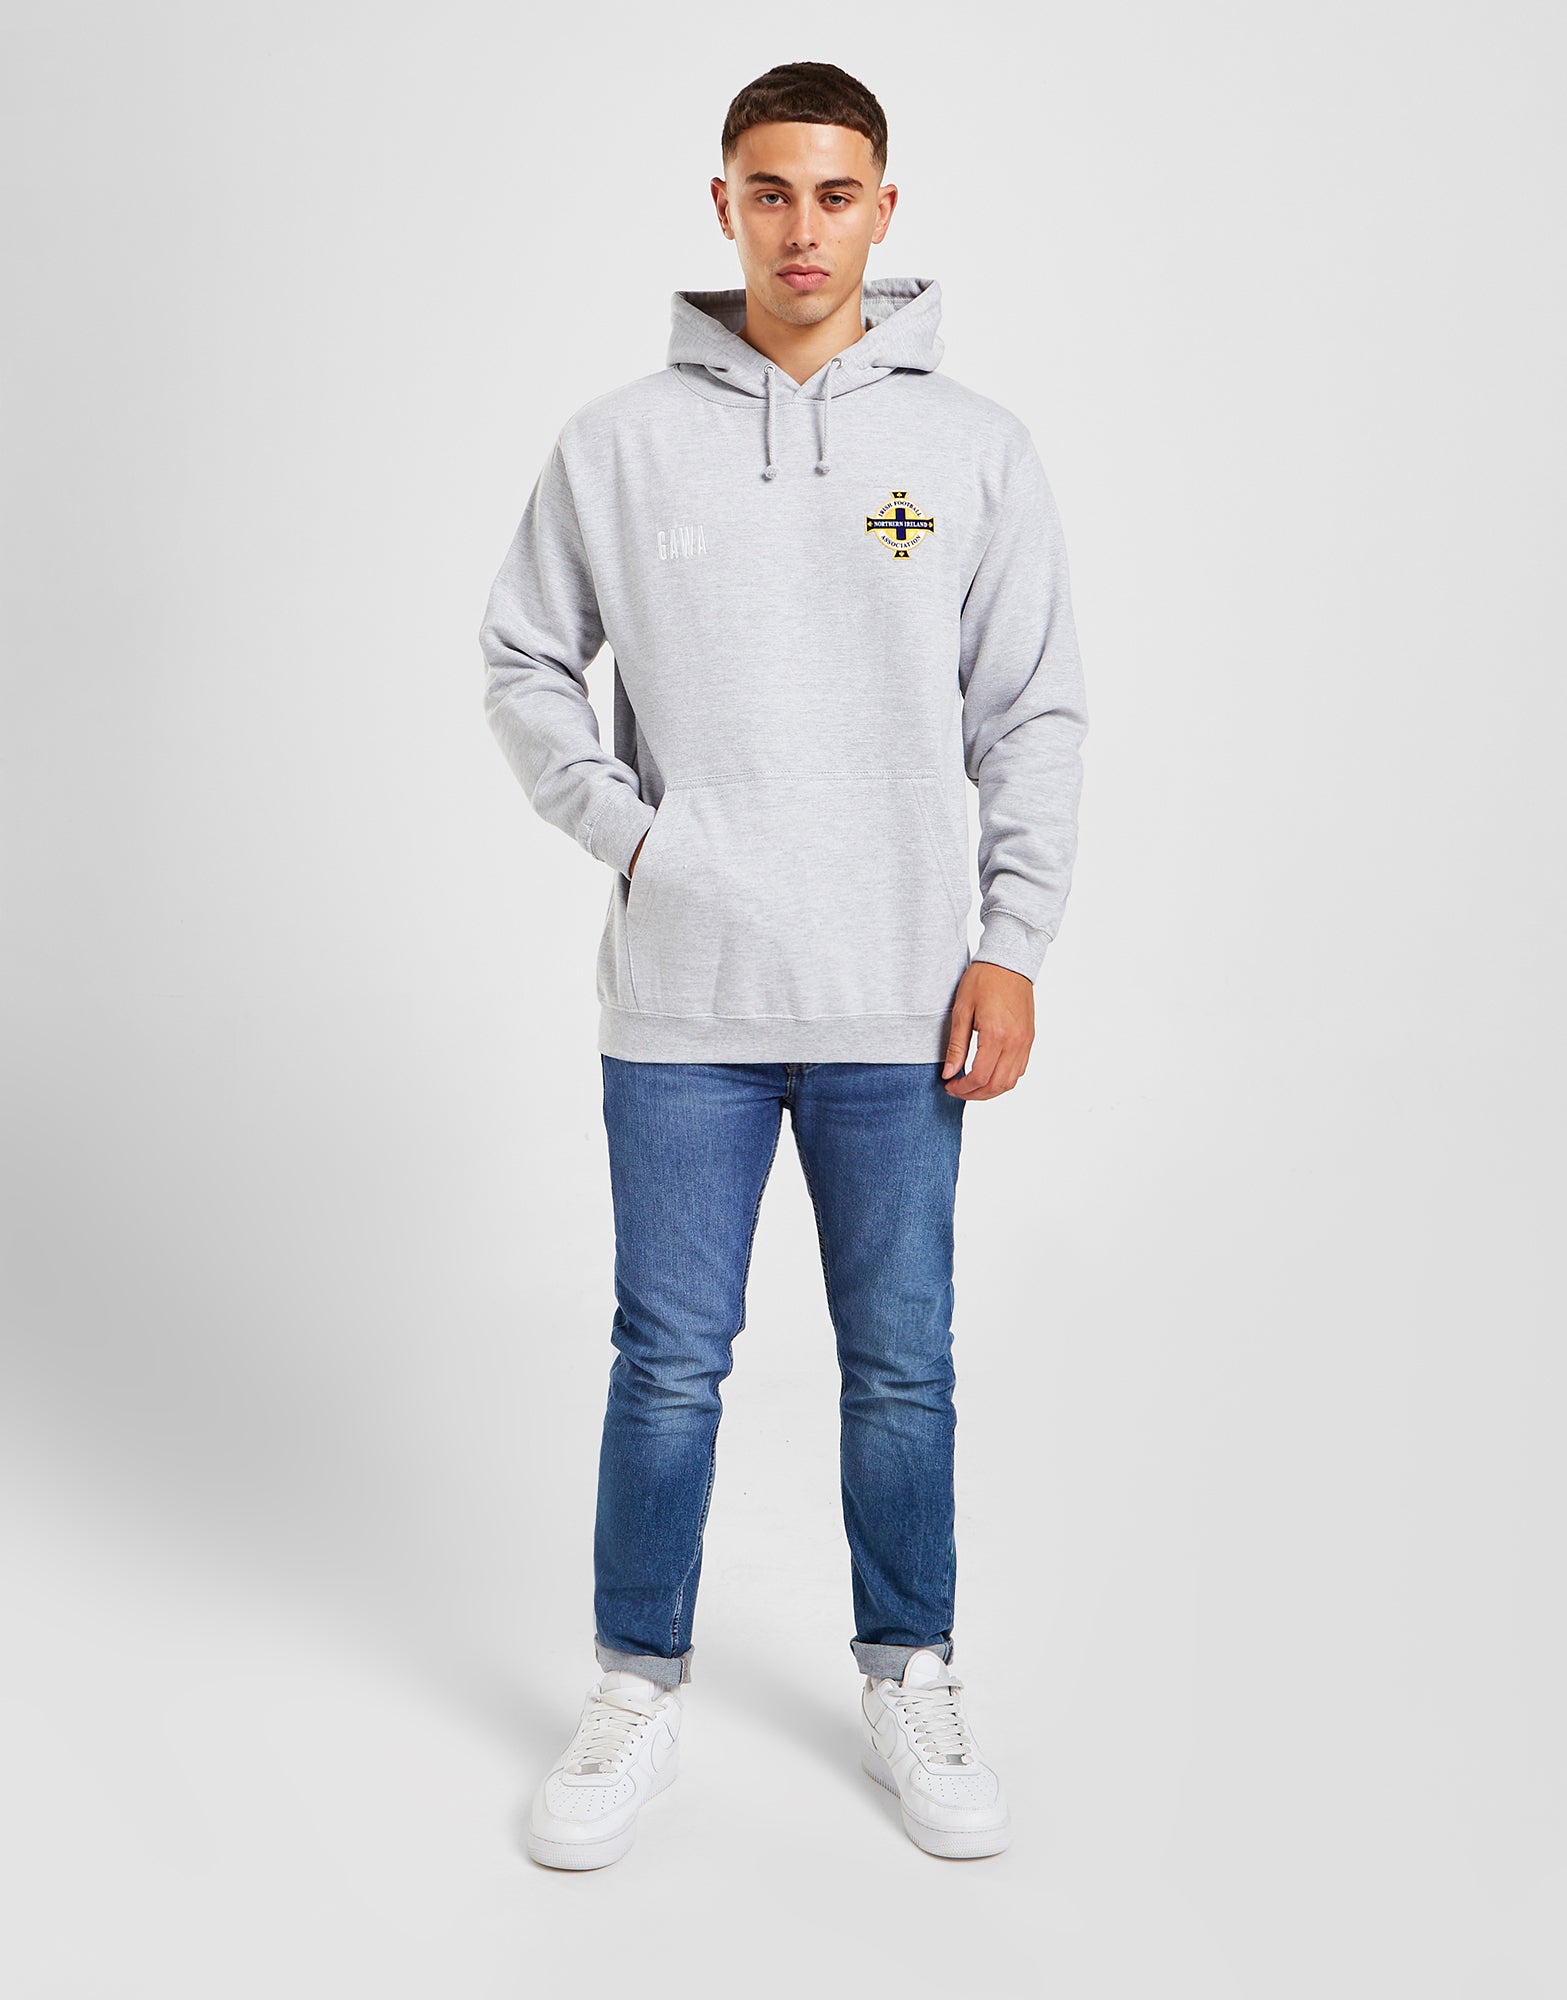 Official Northern Ireland Crest Hoodie - Grey Marl - The World Football Store